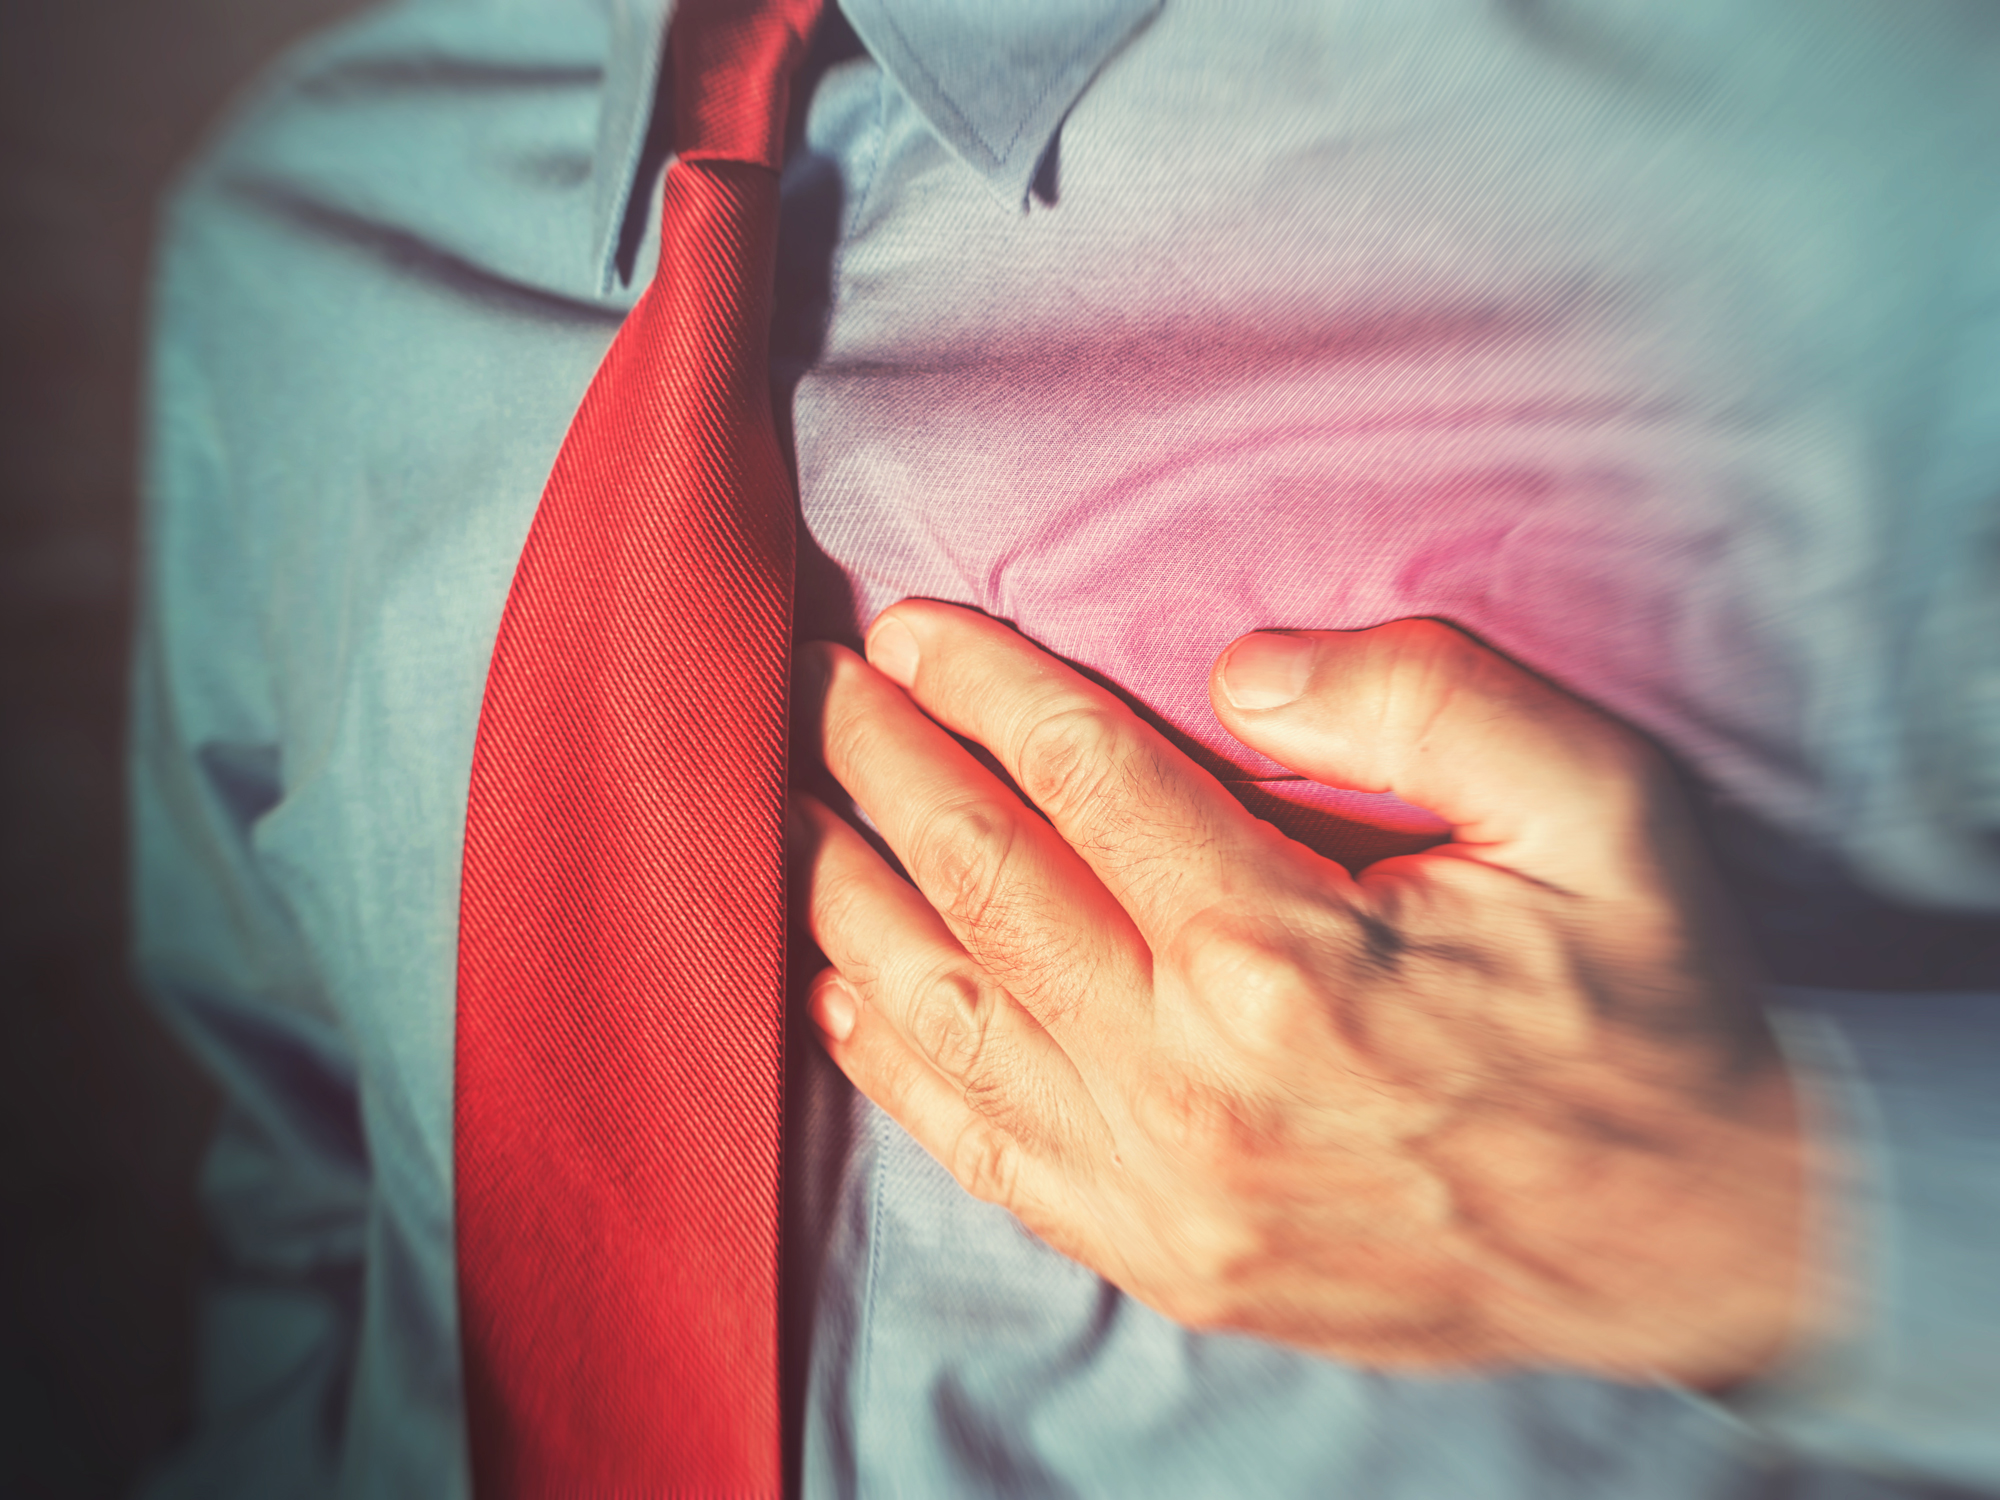 10 signs of the most fatal heart condition